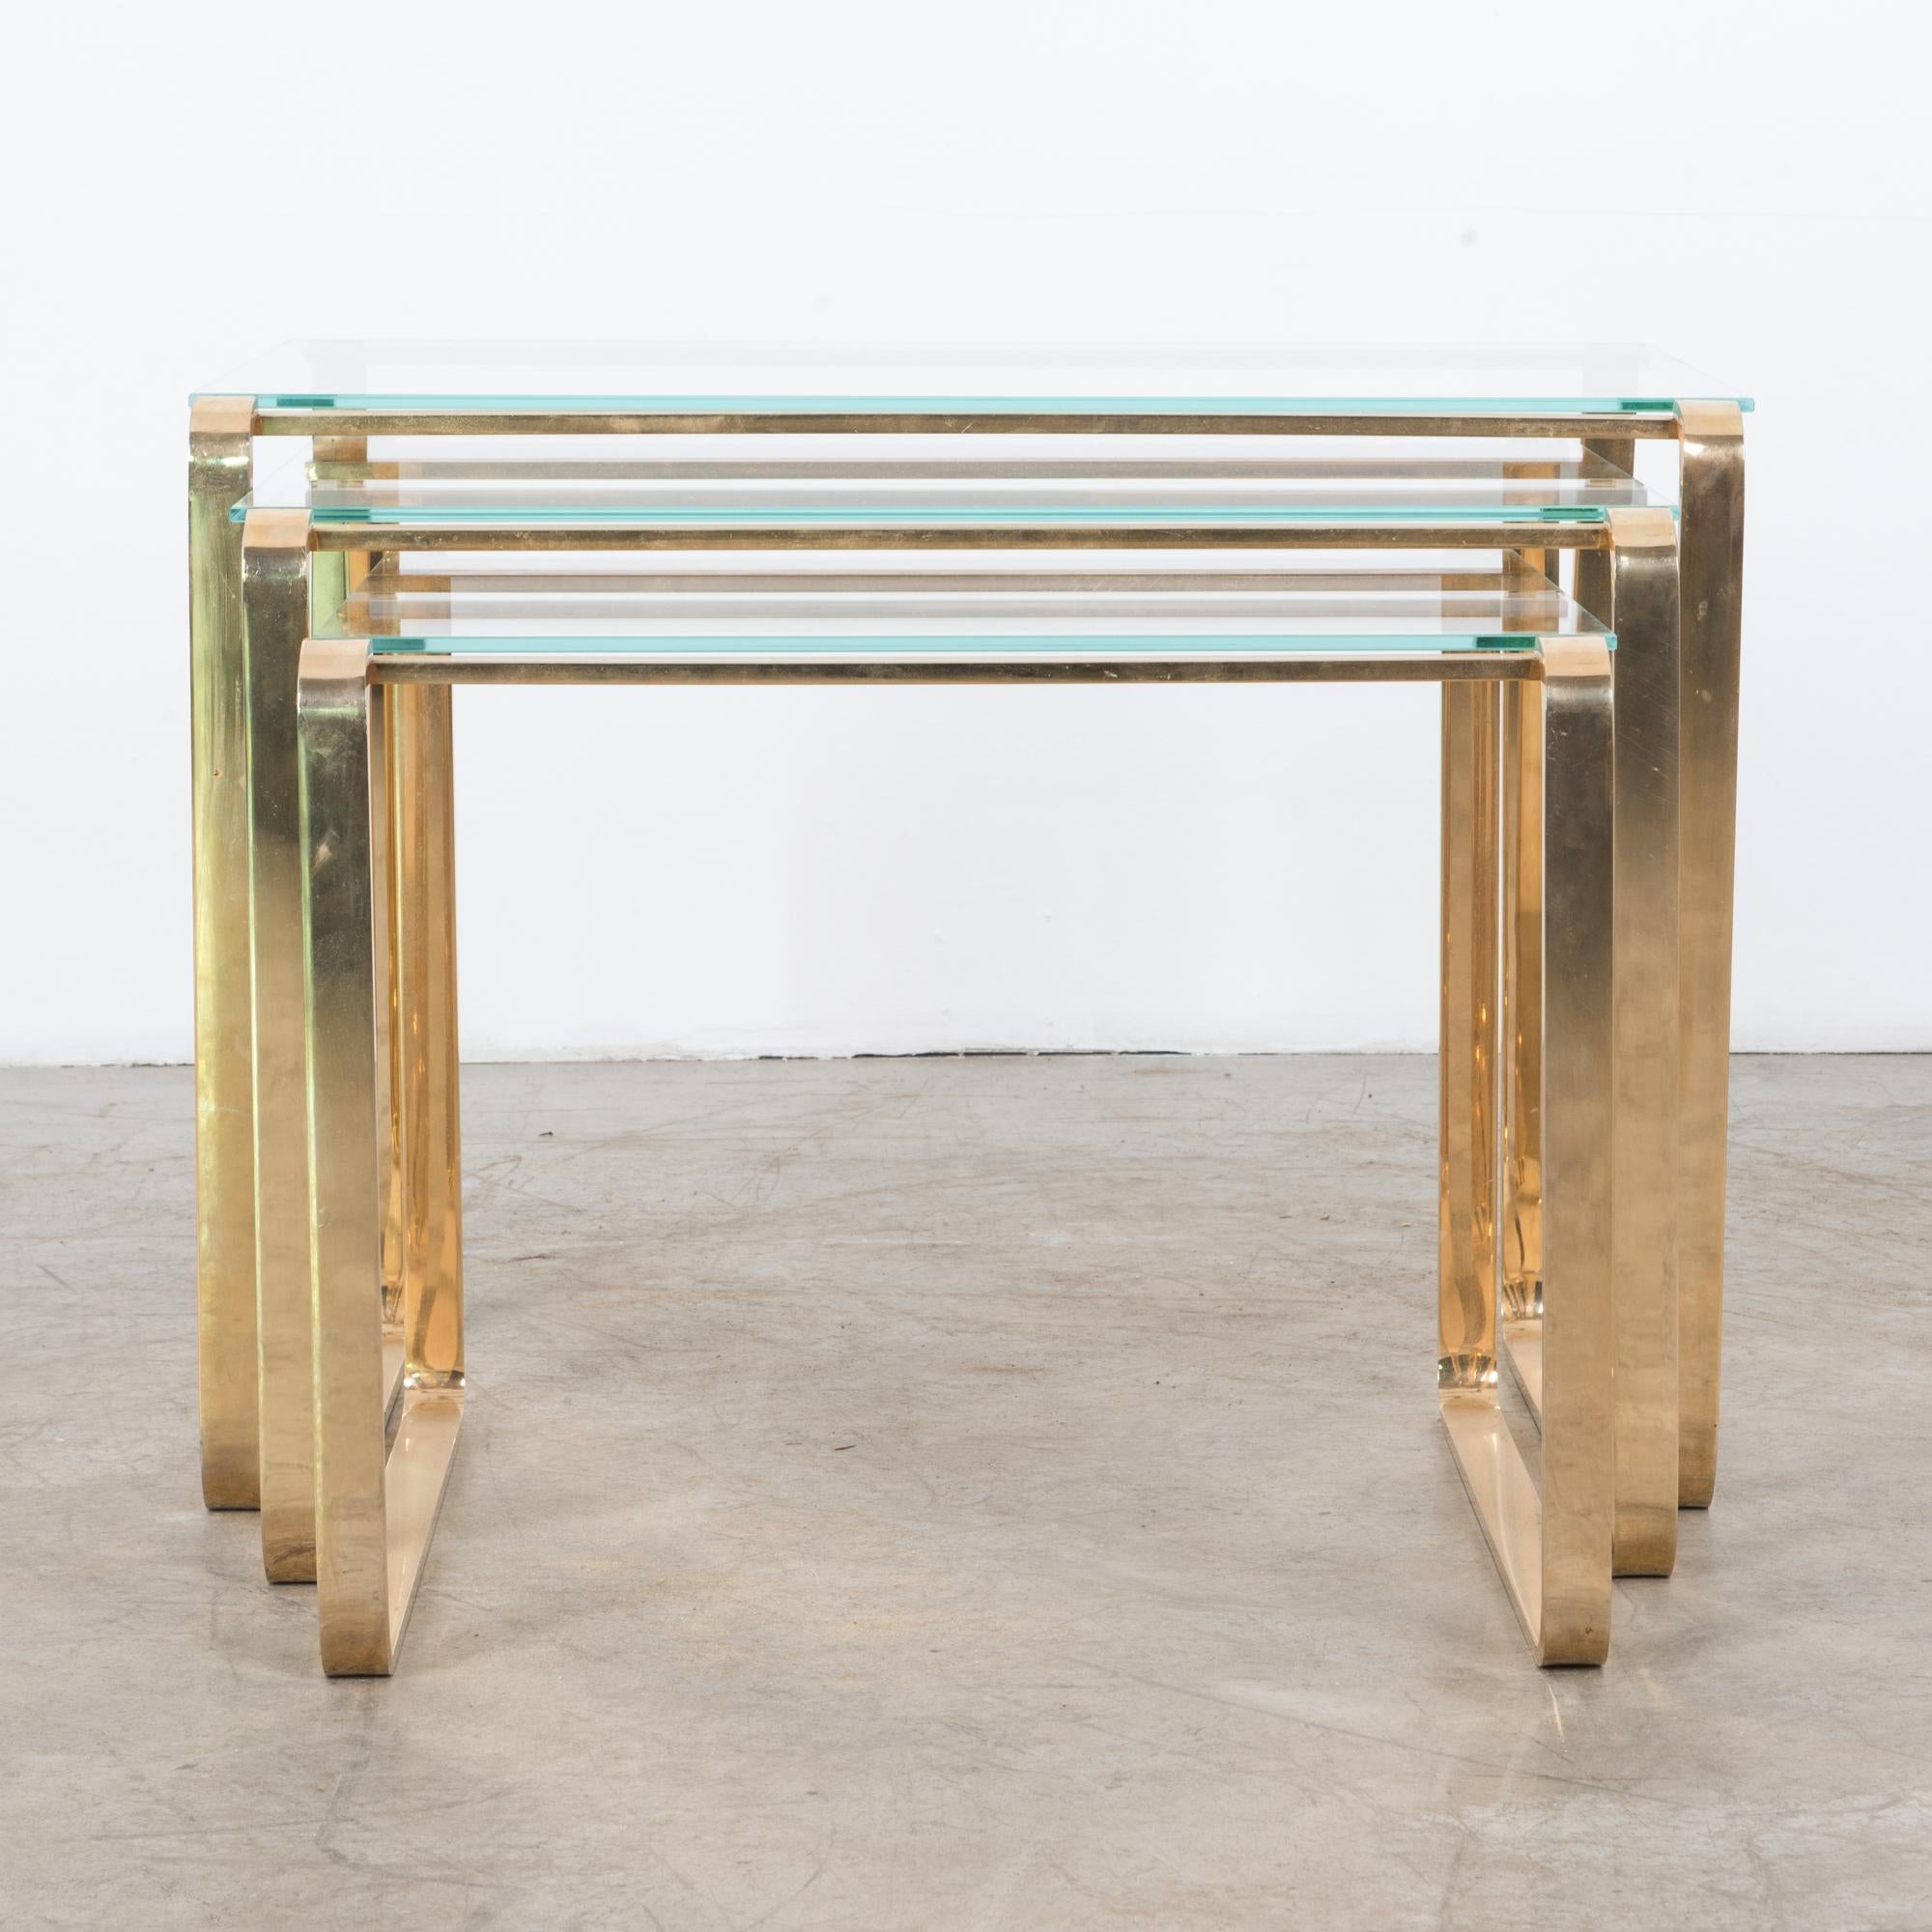 Organic modern metal table legs are brass plated. Convenient nesting configuration allows for free arrangement in the space for variable heights, widths or simply a chic accent. Thick green glass contrasts nicely with the bright and warm brass. This